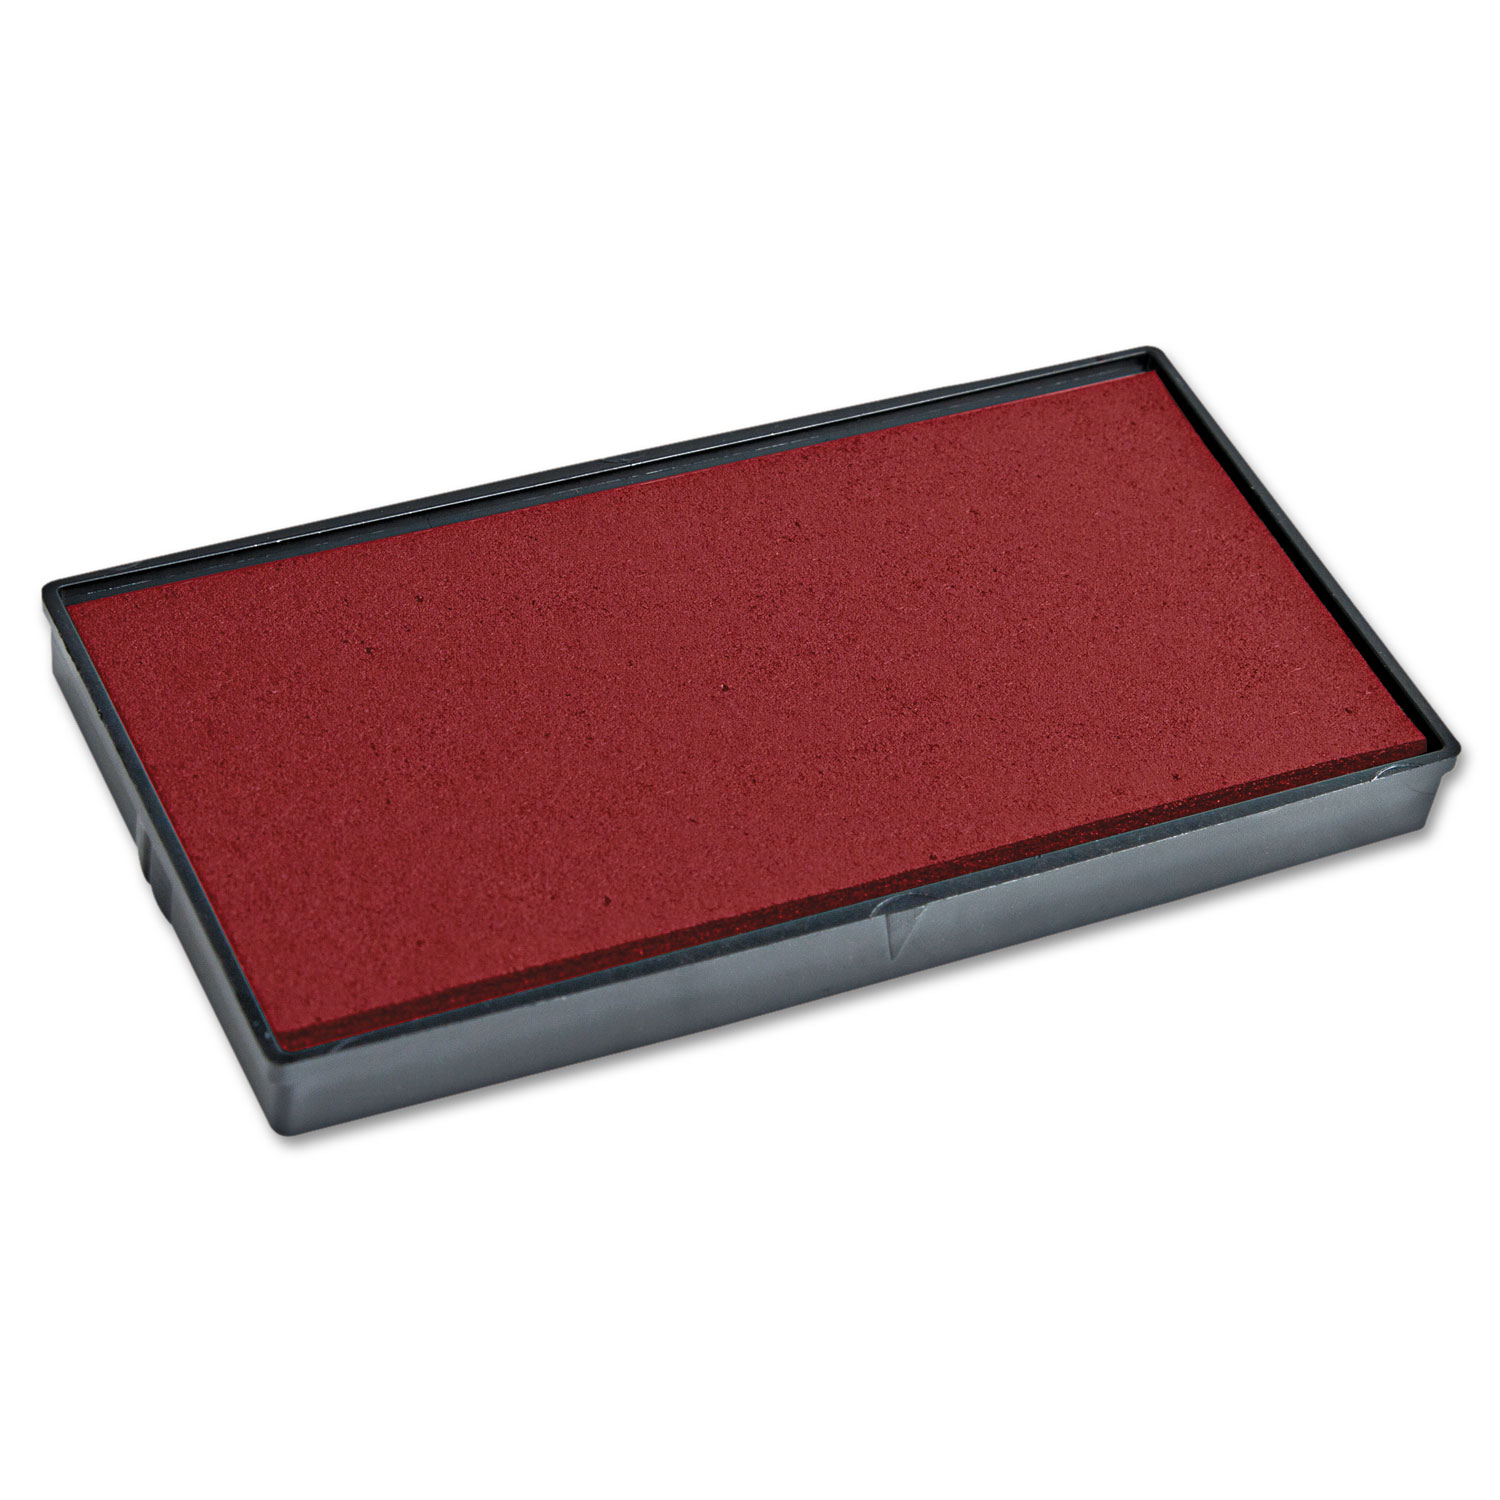  COSCO 2000PLUS 065467 Replacement Ink Pad for 2000PLUS 1SI20PGL, Red (COS065467) 